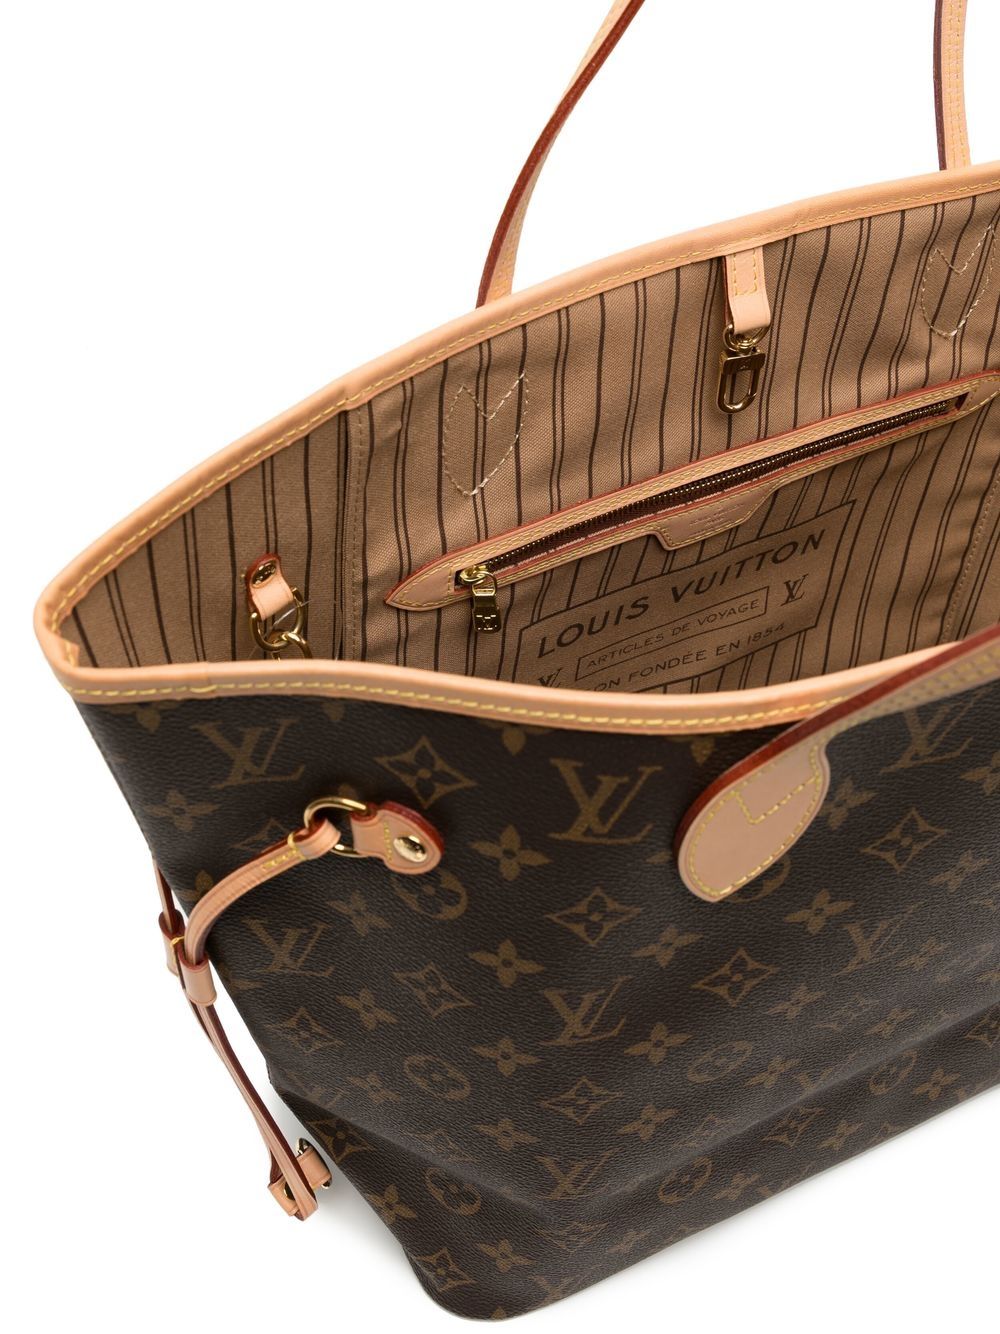 Louis Vuitton pre-owned Monogram Neverfull Tote - Farfetch